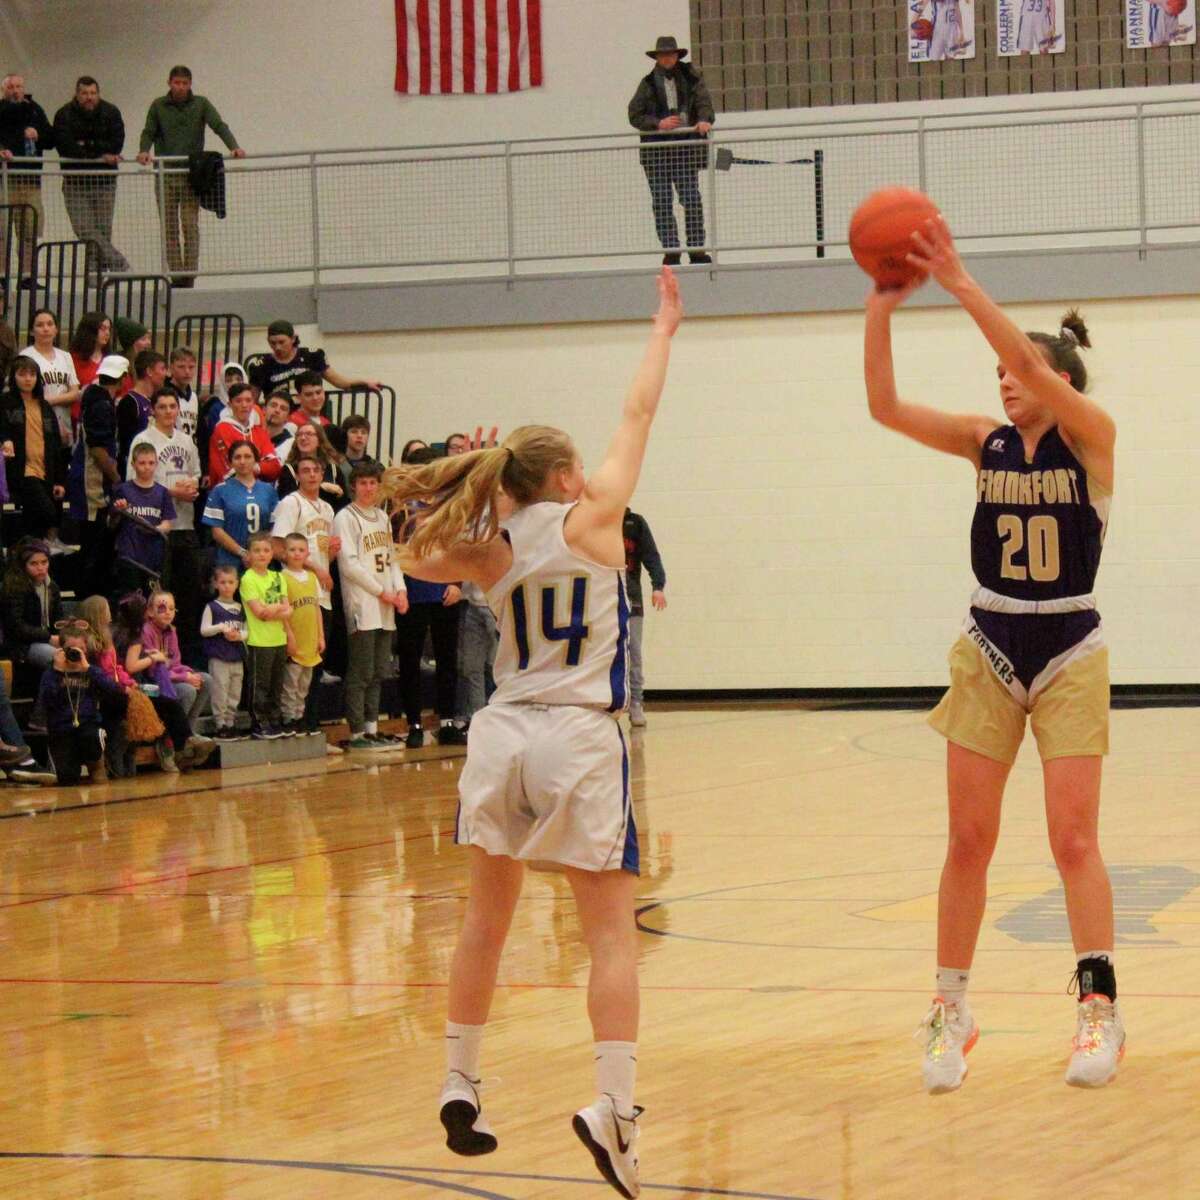 Reagan Thorr shoots a three-pointer against Onekama, less than an hour before she would tear her ACL going for a rebound against the Portagers on March. 6, 2020. (Record Patriot file photo)